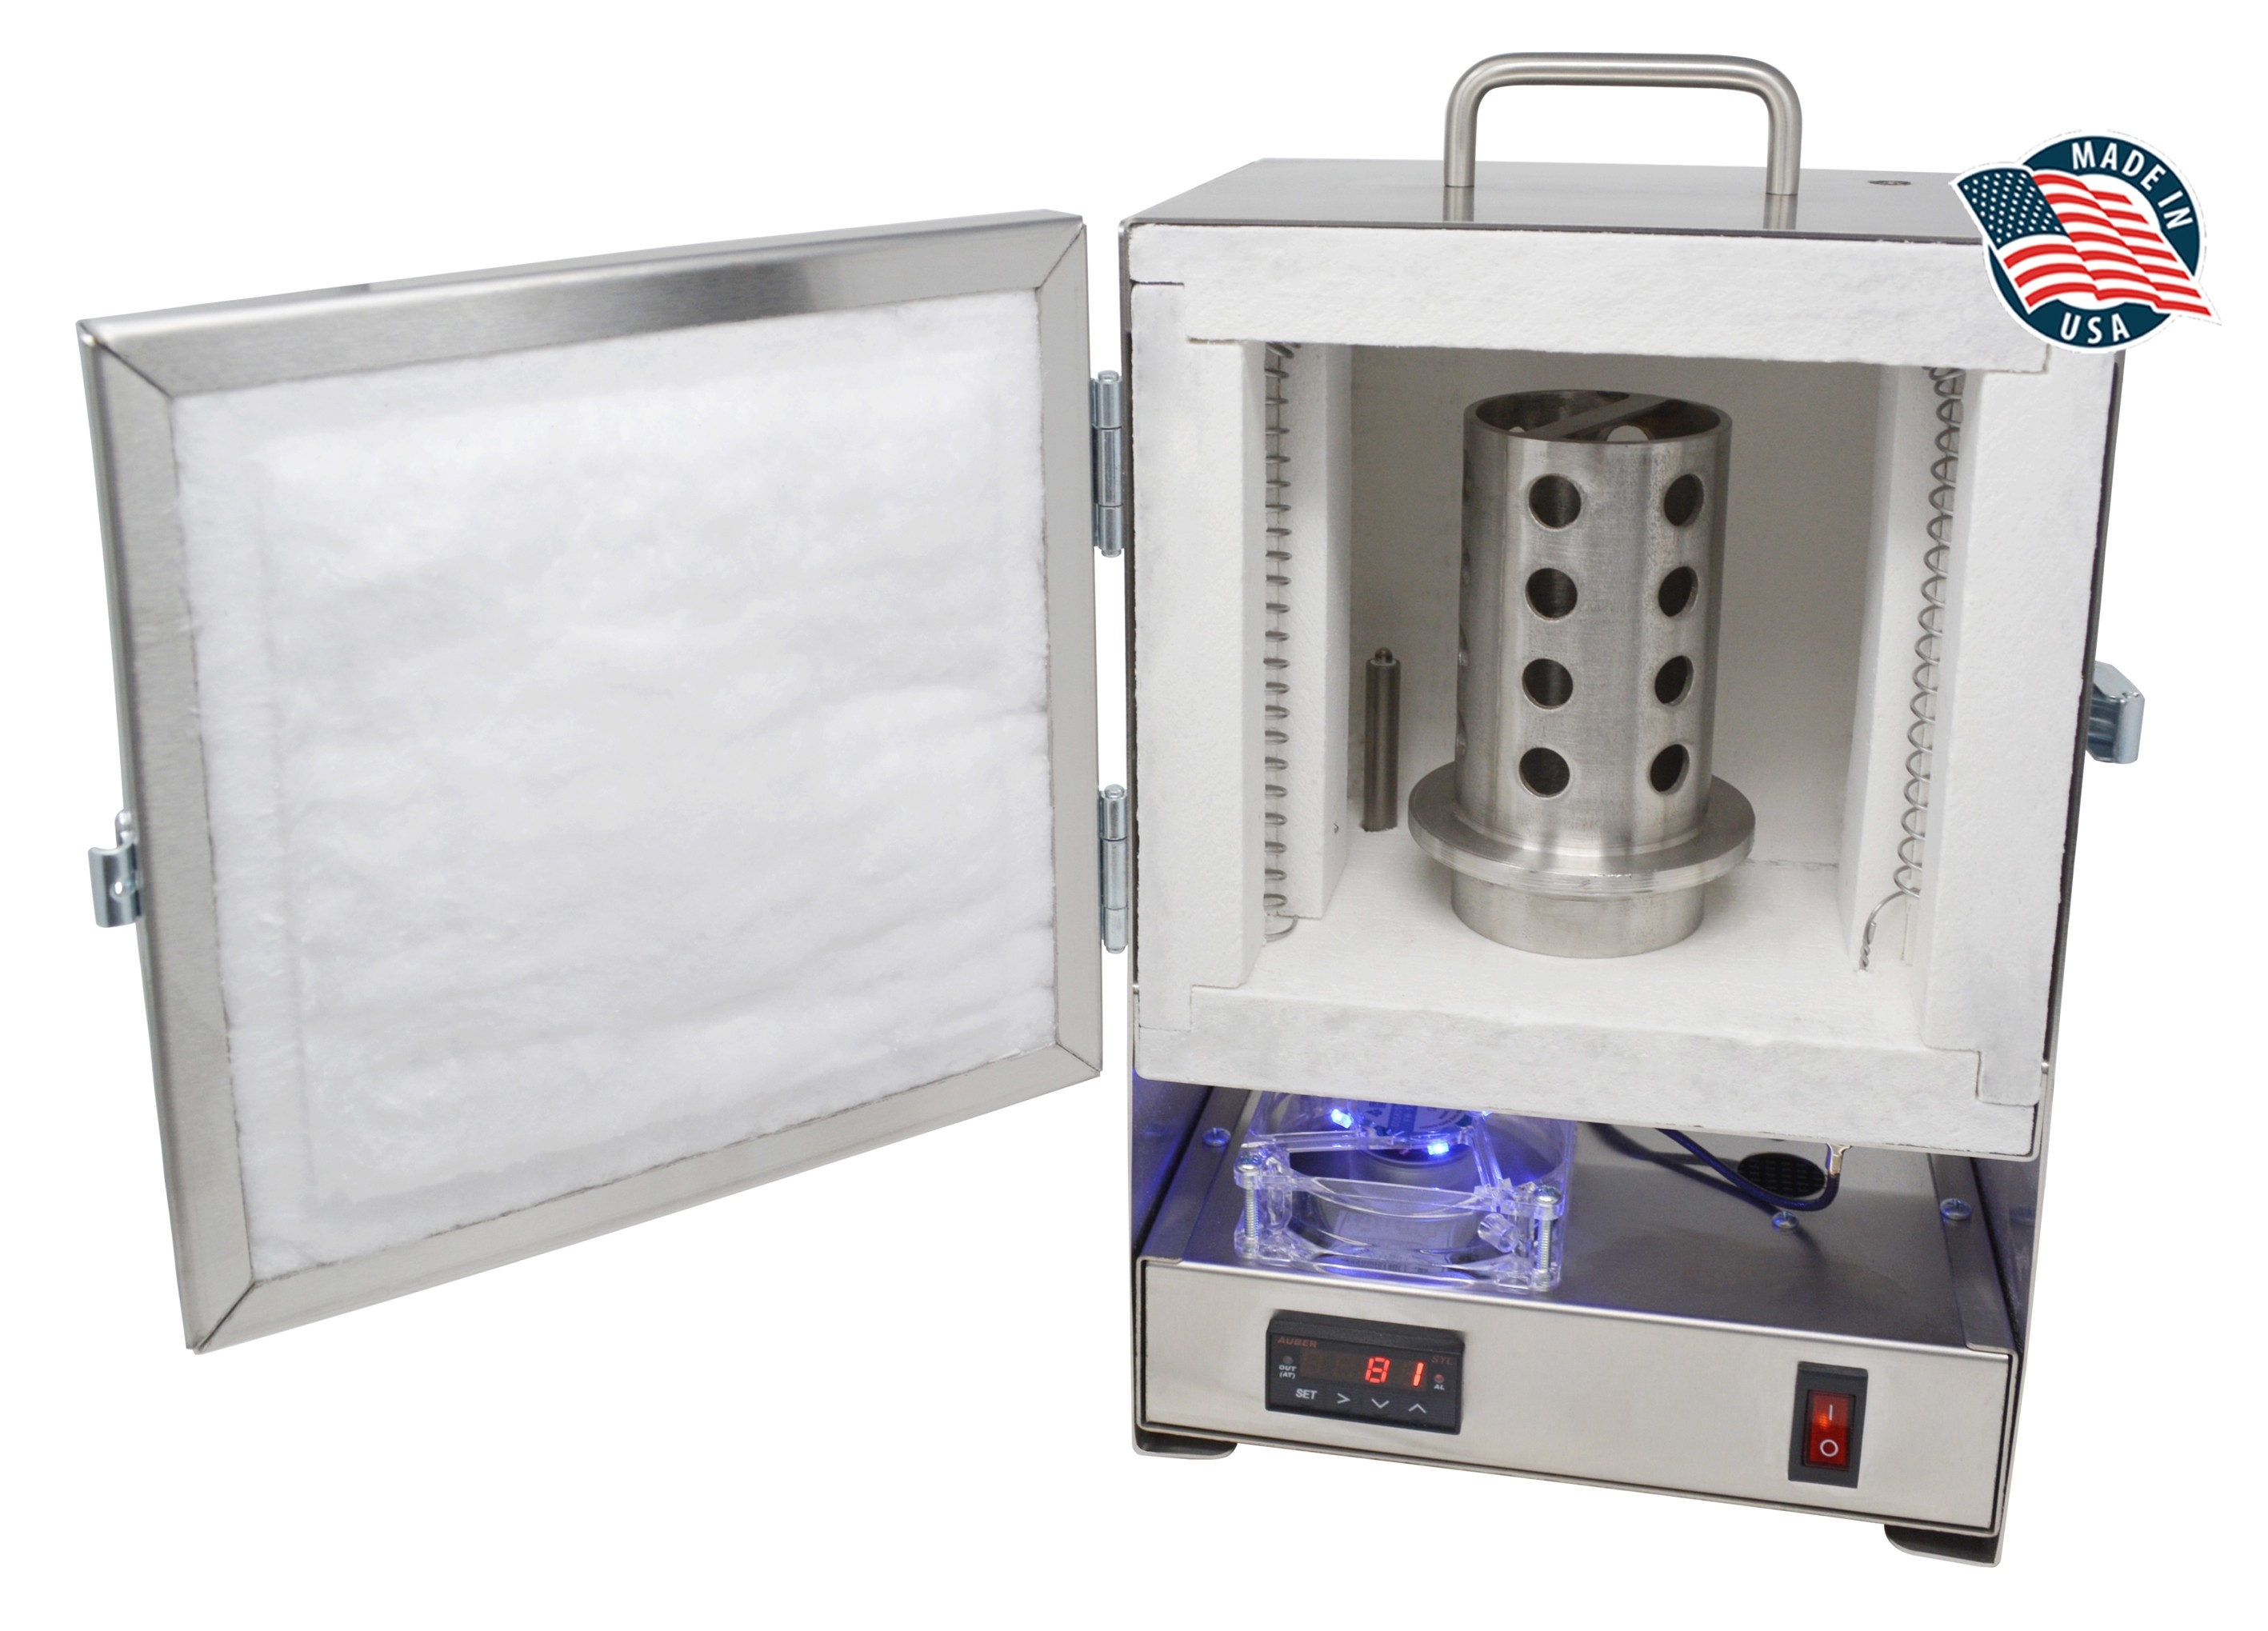 STANDARD TableTop Hi-Temp 2200°F Electric Burnout Oven Kiln for 3D PLA/Resin, and Carvable Wax 